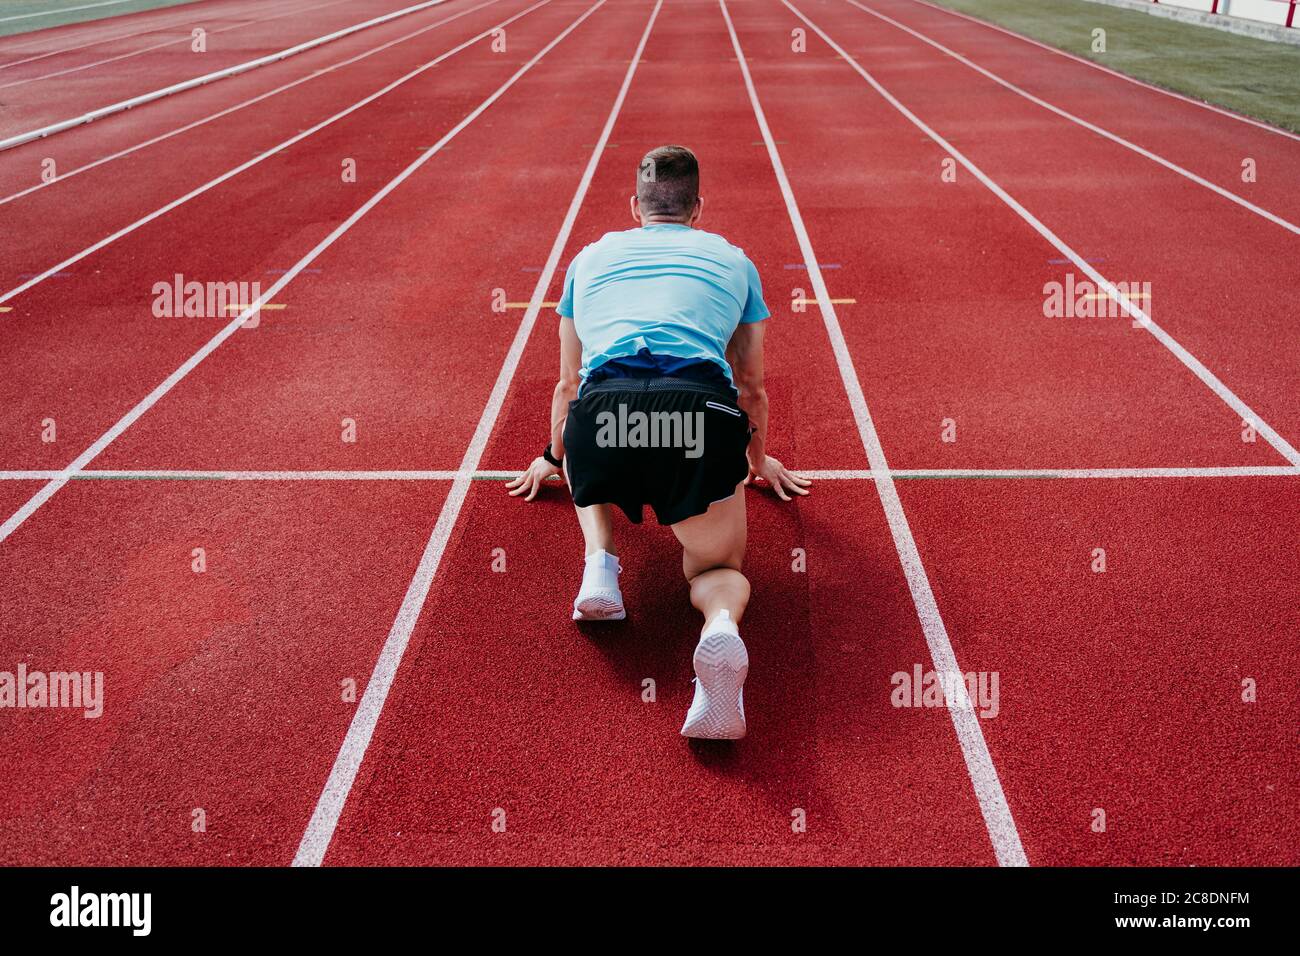 Male athlete in starting position on tartan track Stock Photo